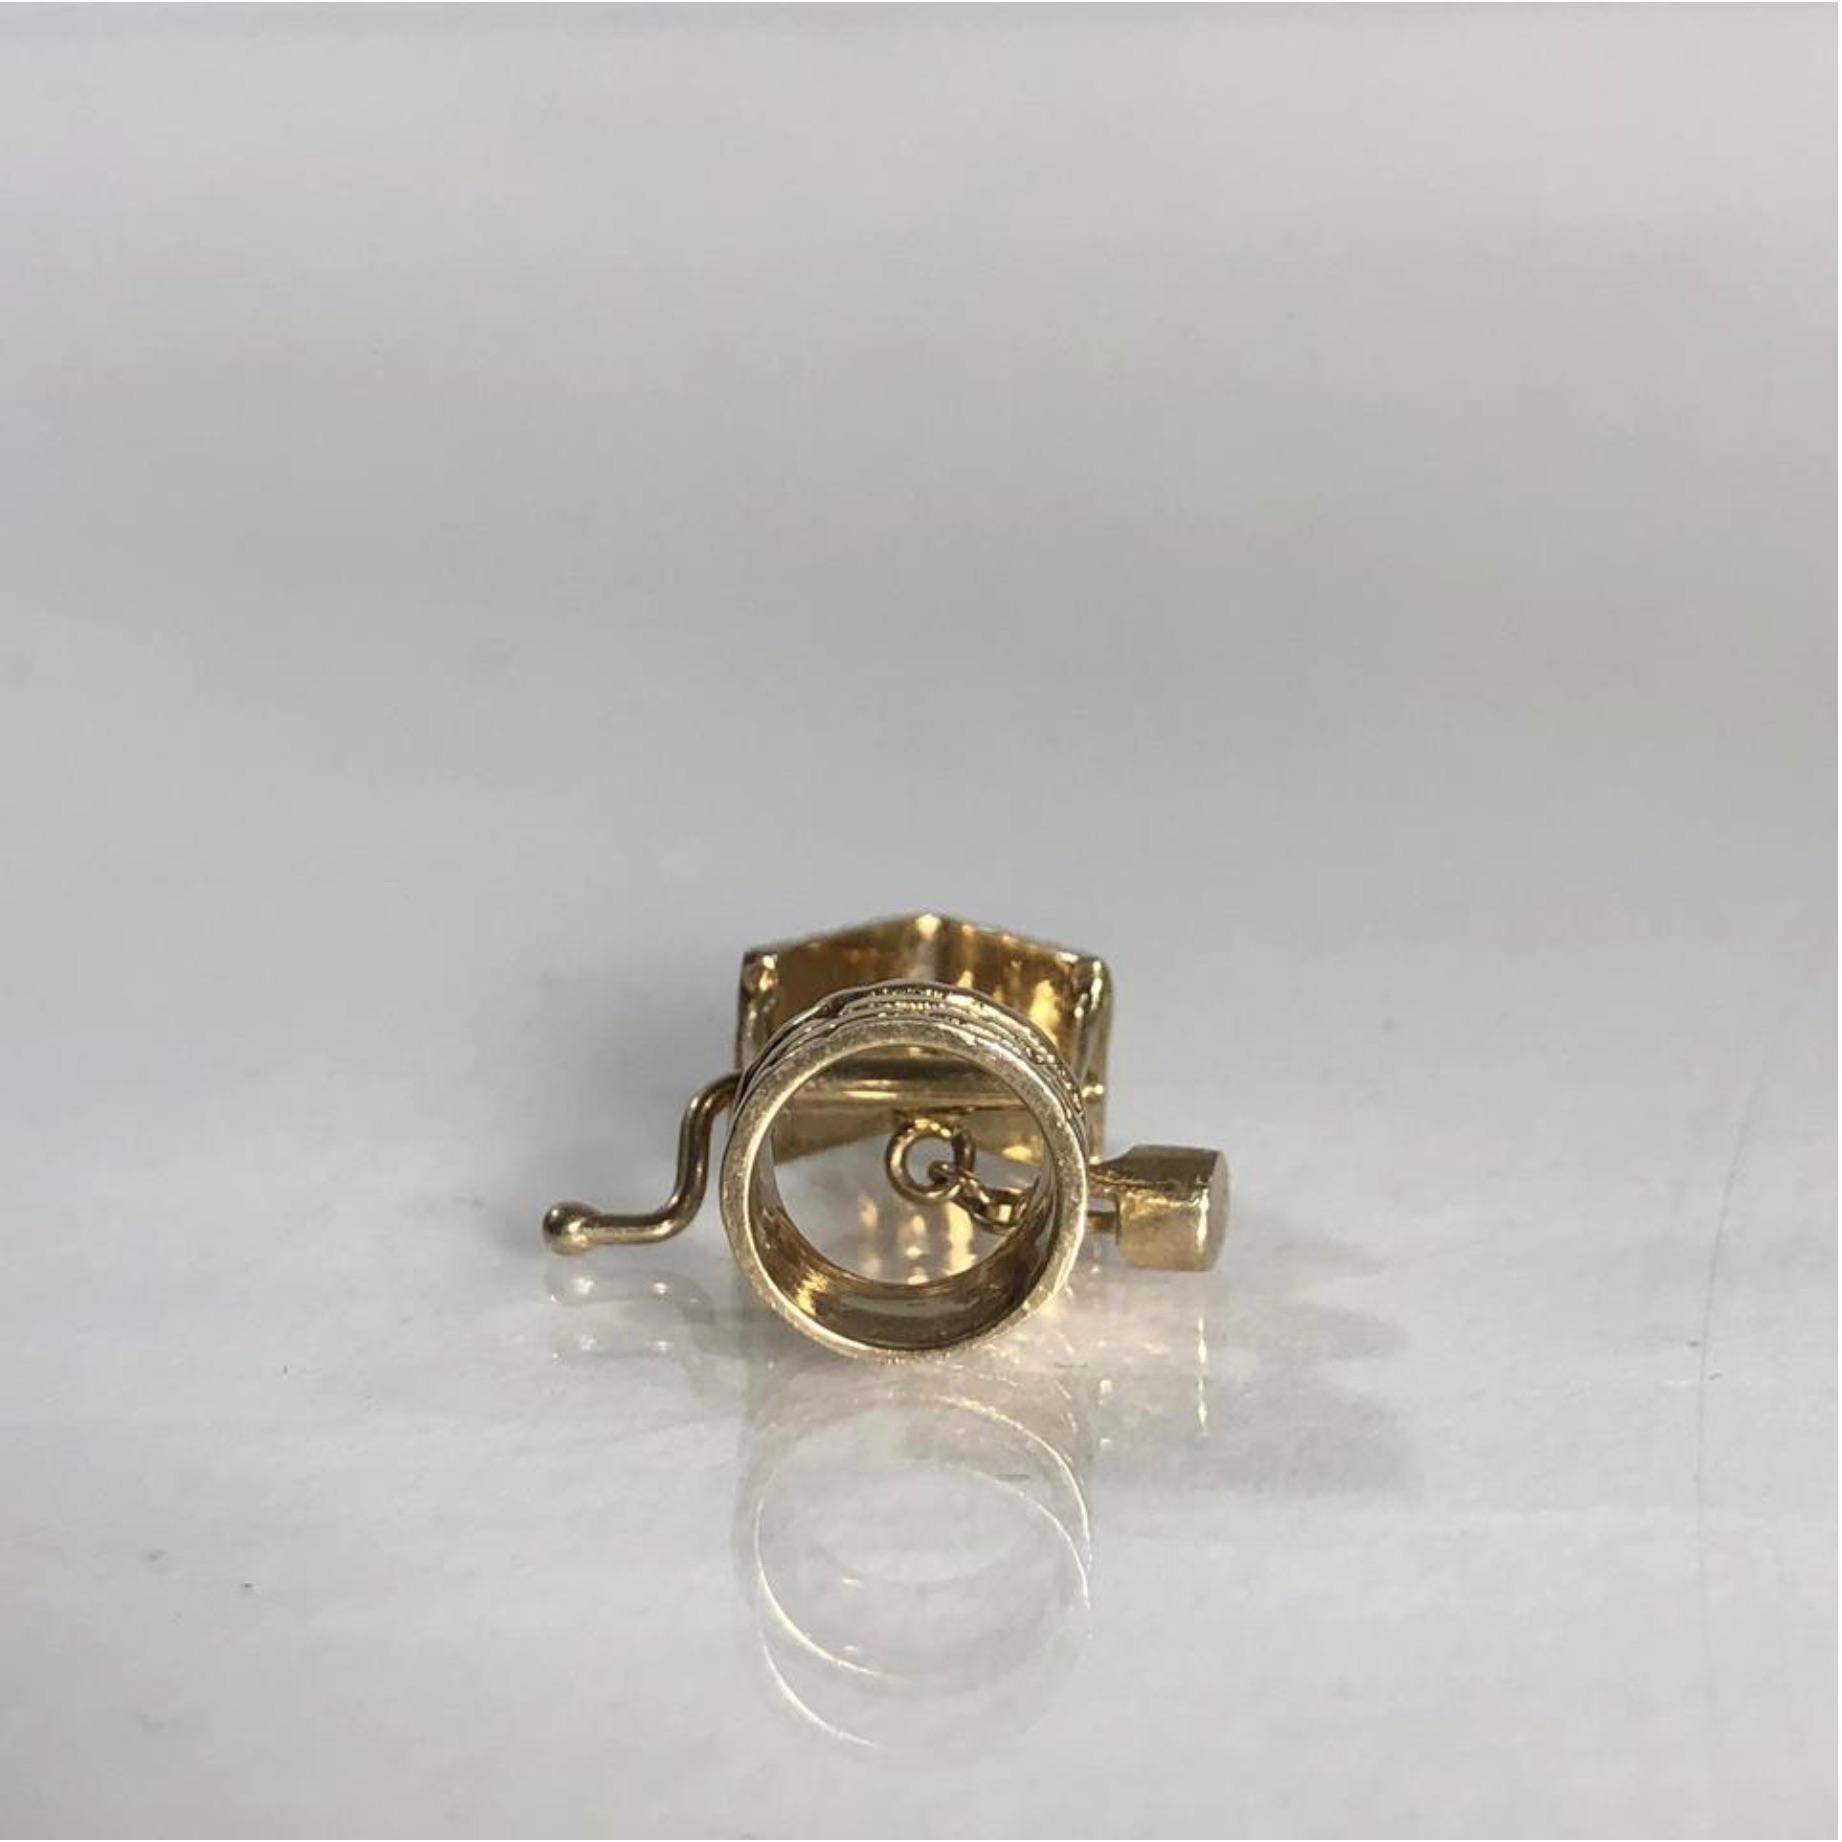 Condition - Very good

SKU - 1043.3

Original Retail - $185

Dimensions - .75 x .4 x .4; 2.5 grams

Material - 14k Yellow Gold

Additional Information - Please note this item is for the bucket charm alone.